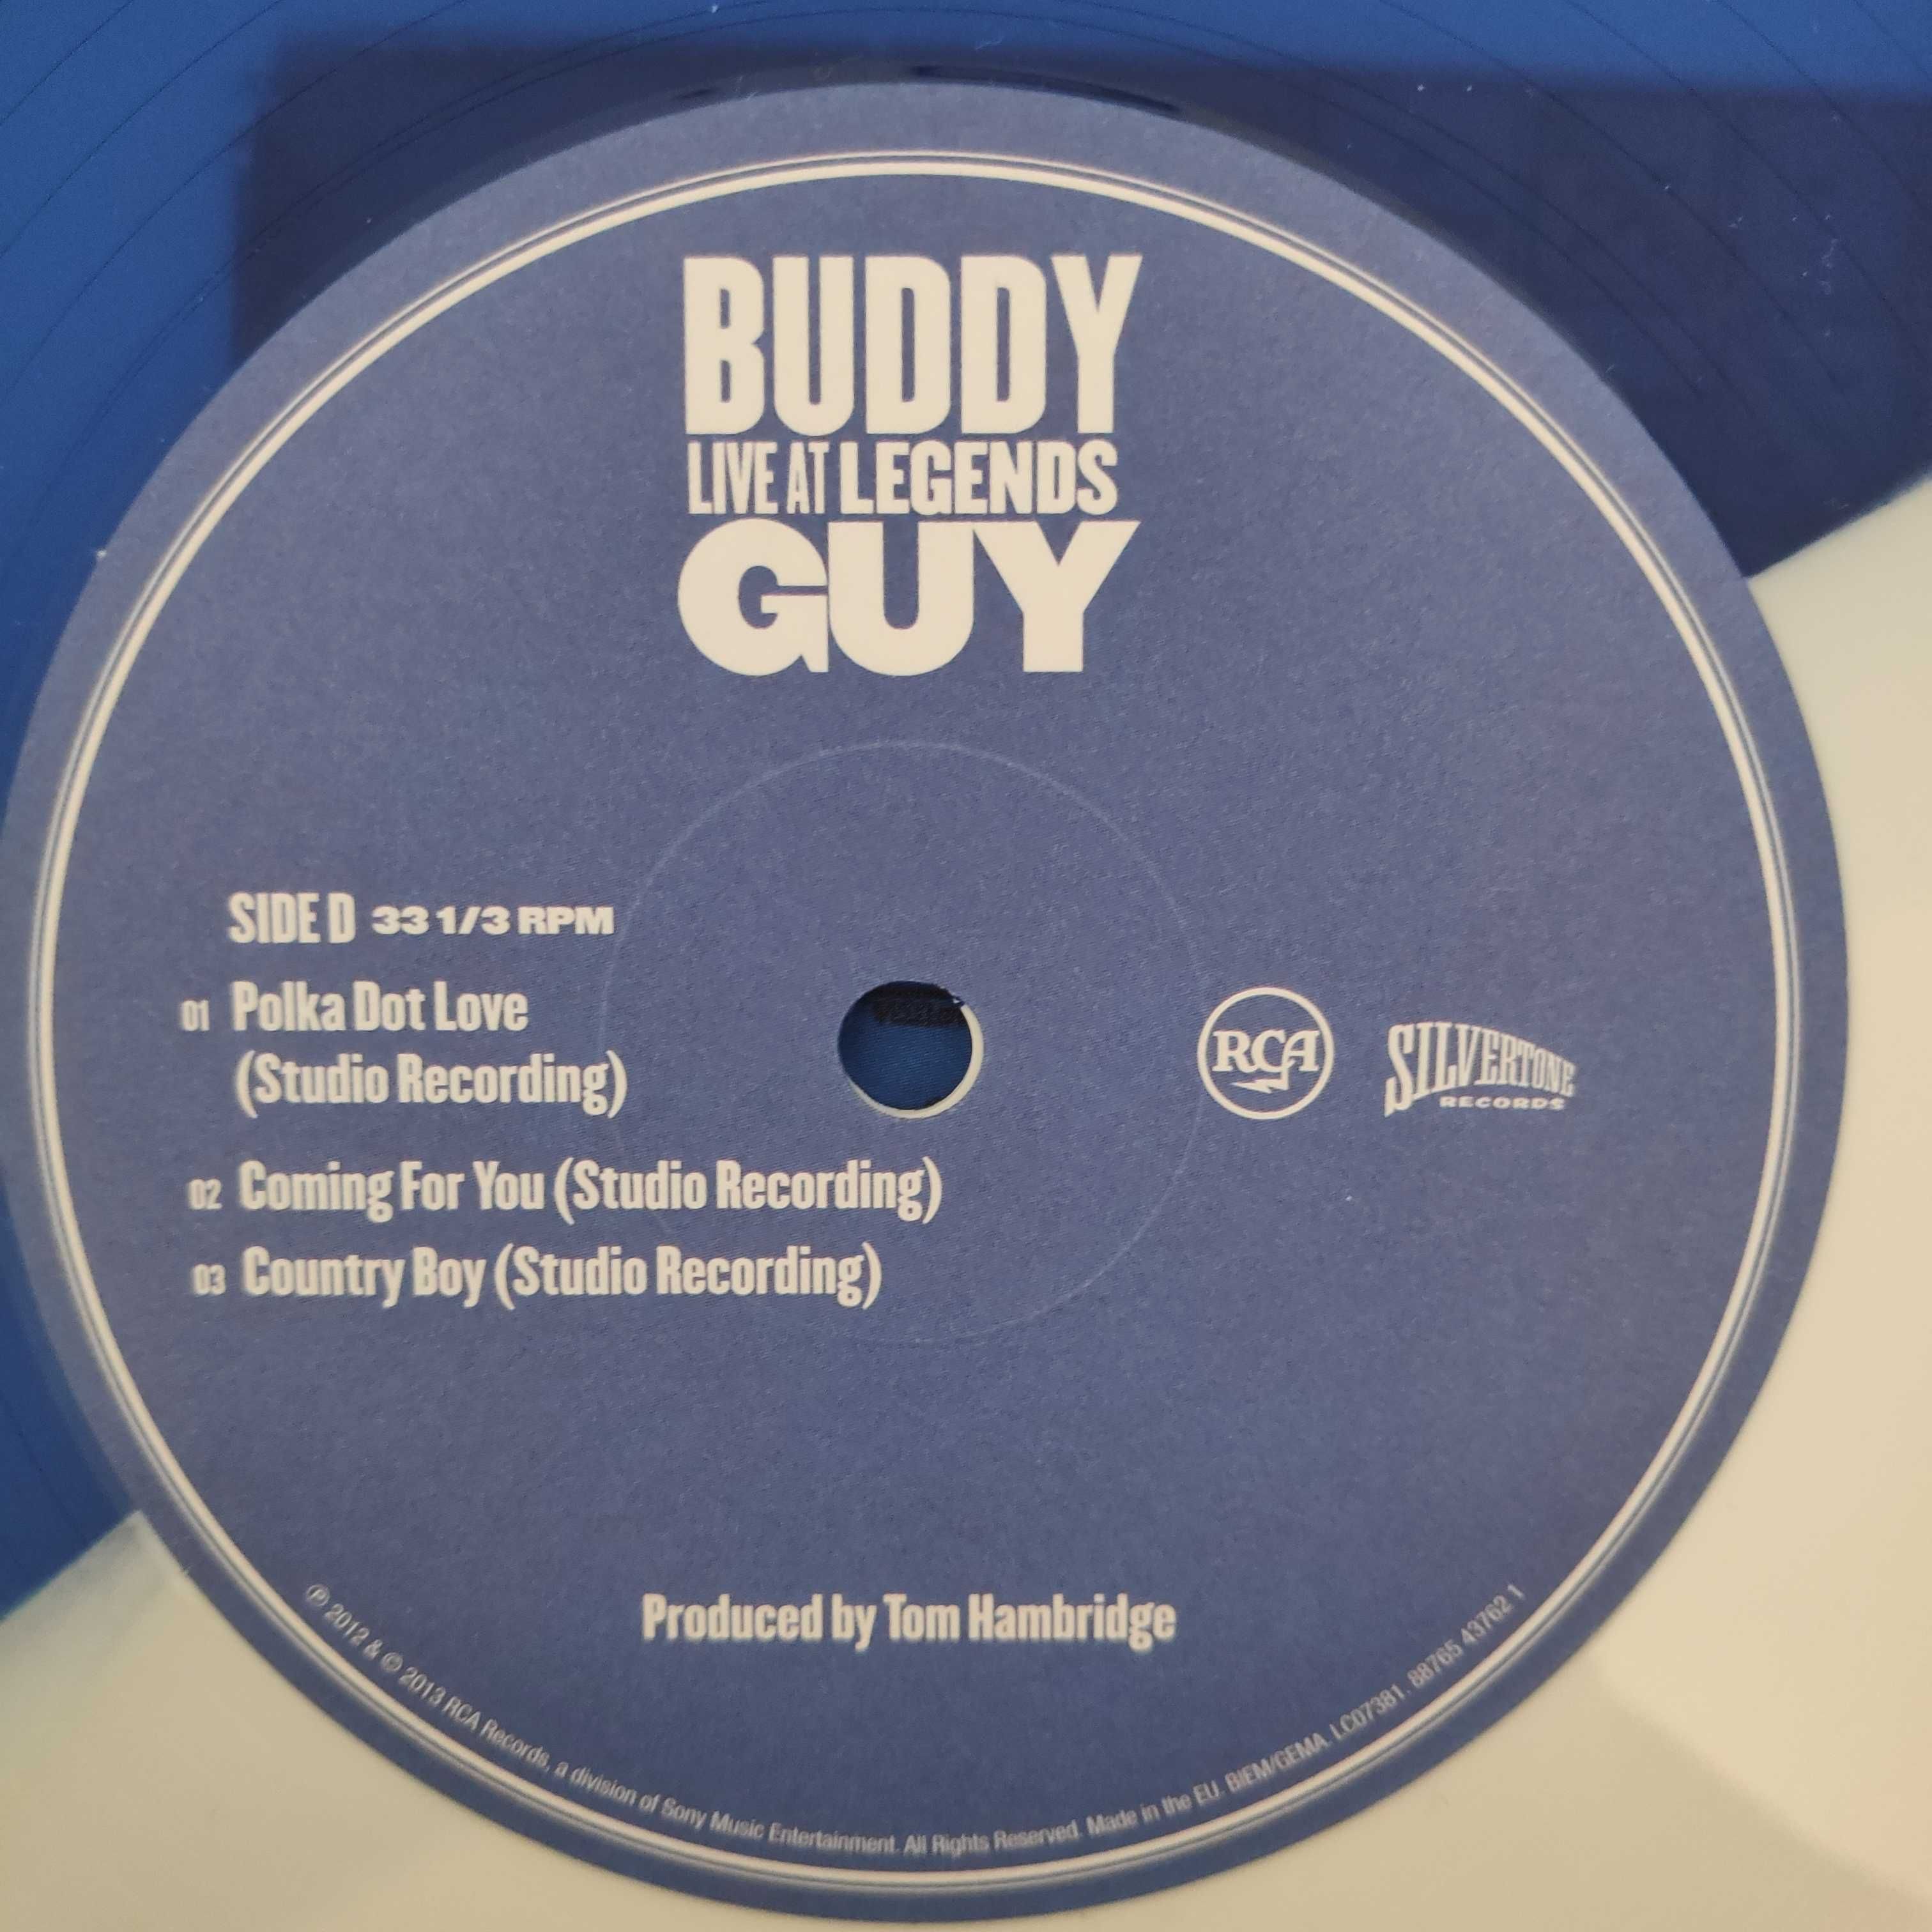 Buddy Guy - Live At Legends